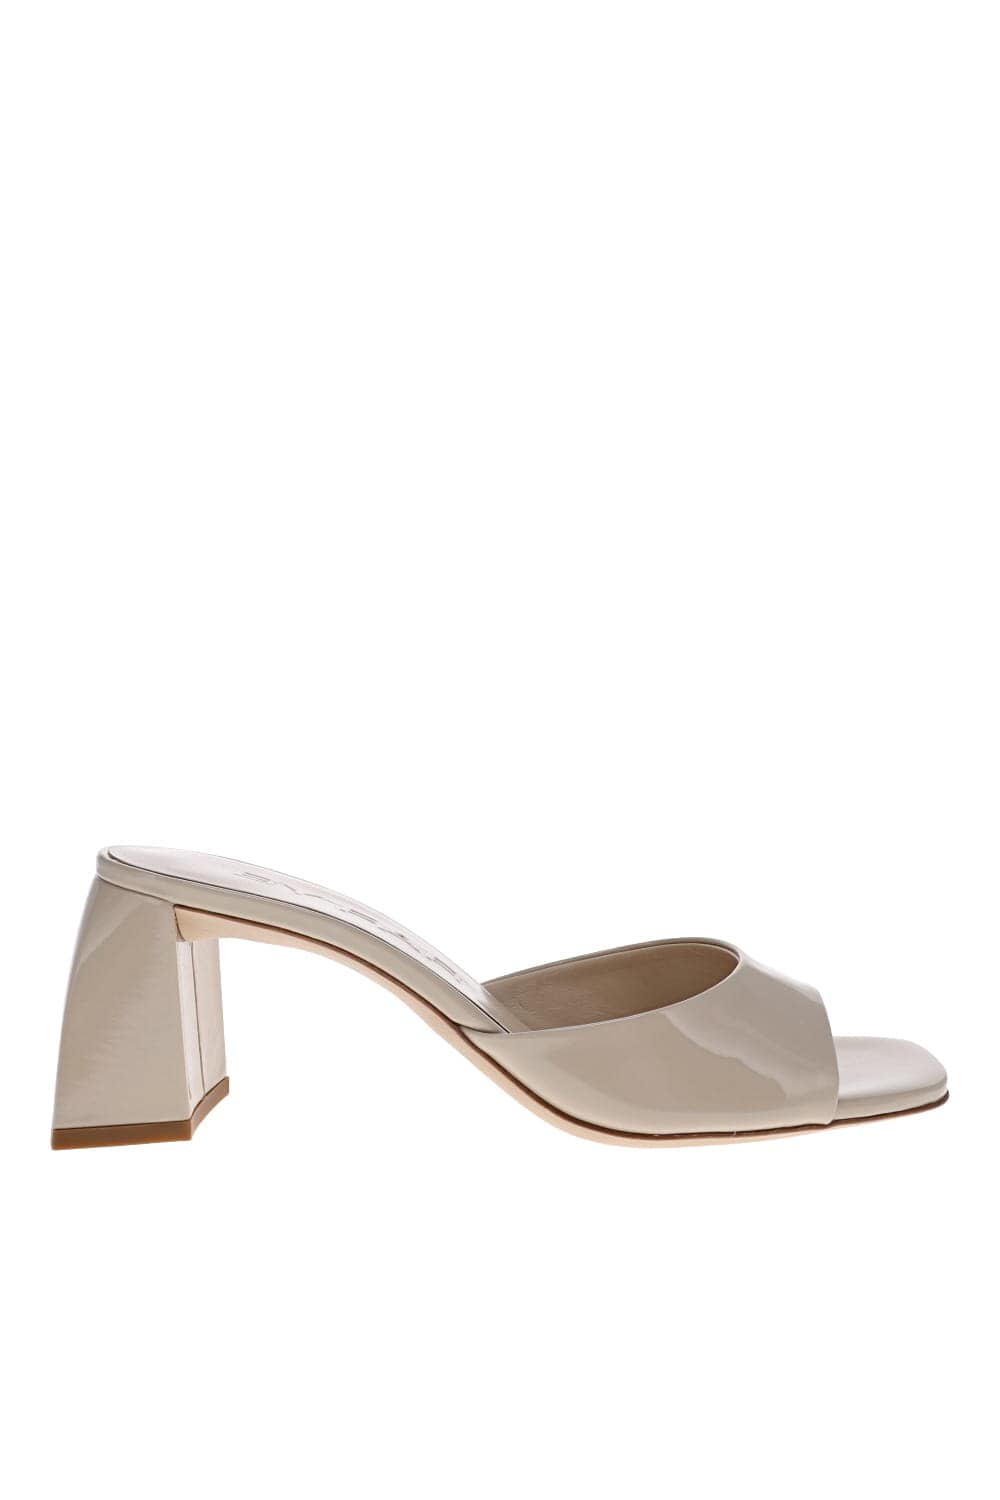 BY FAR Romy Oatmilk Patent Leather Mules